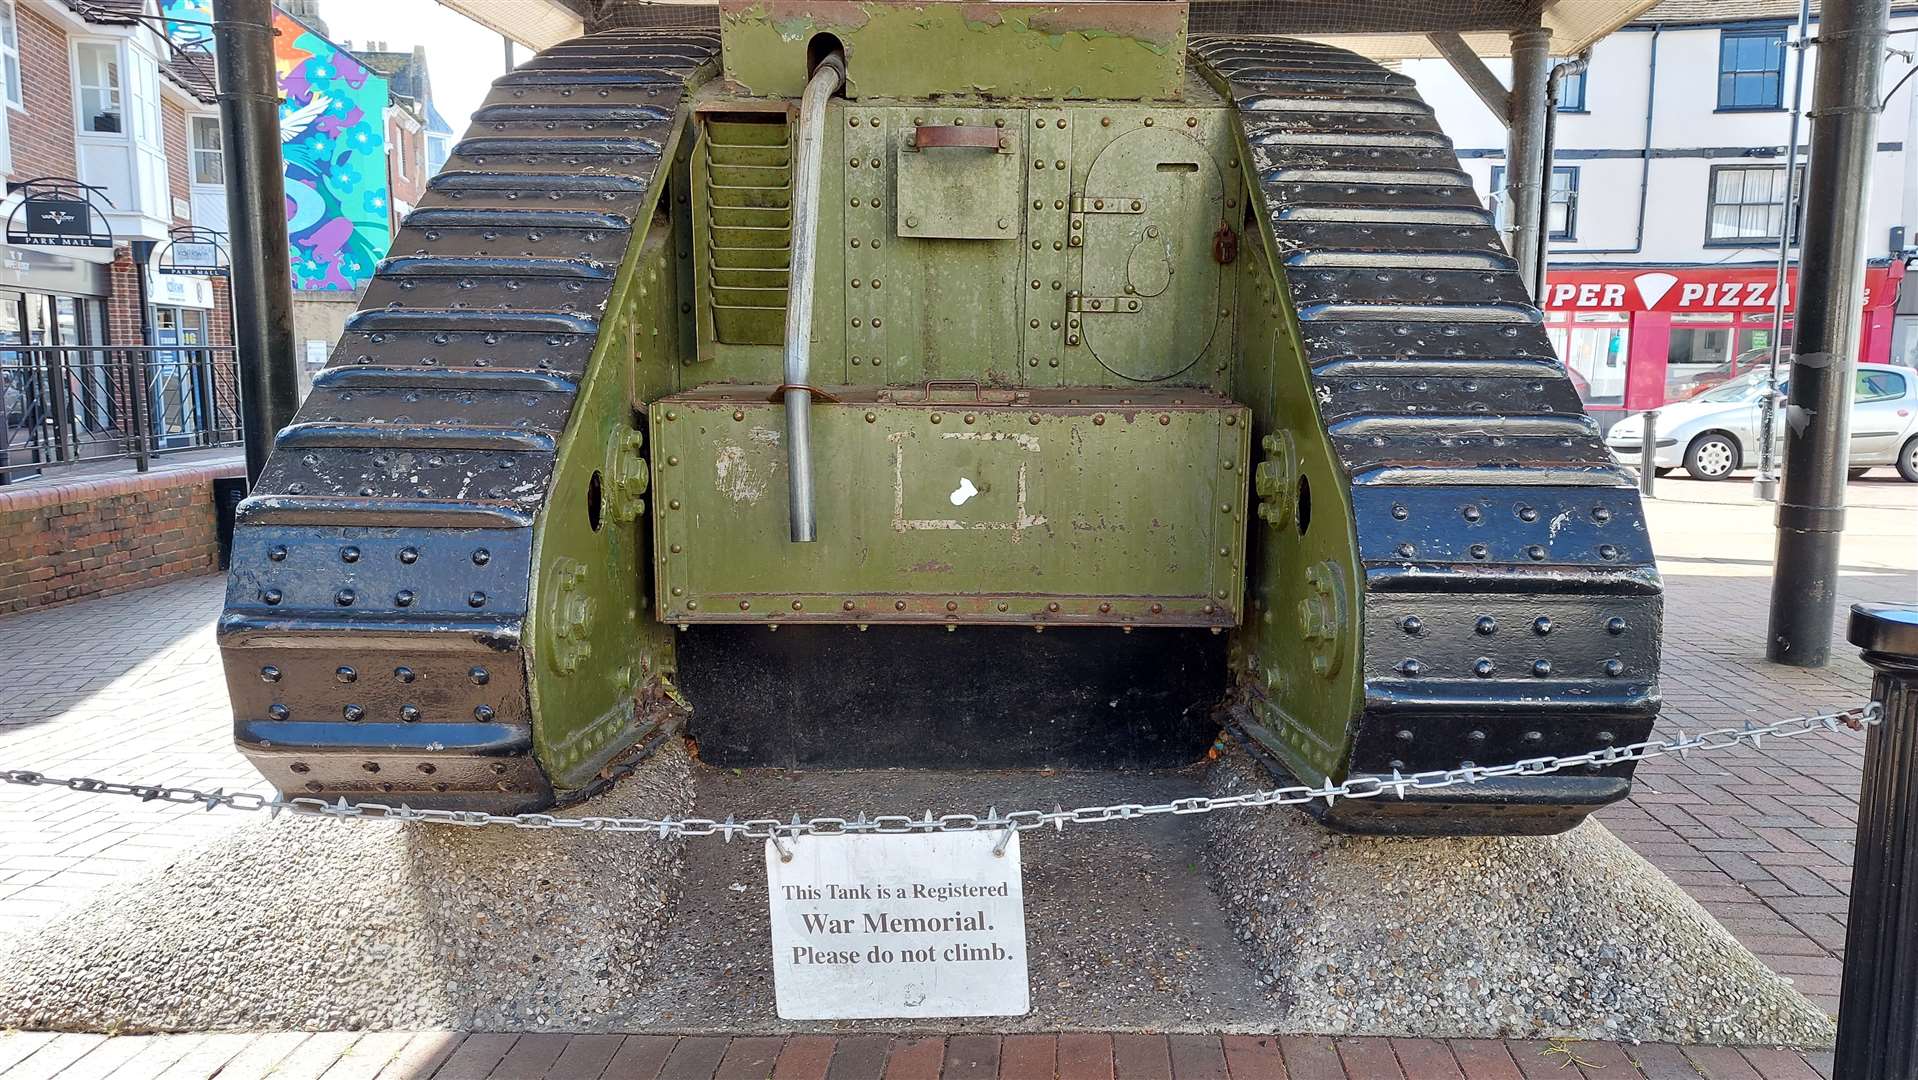 A sign is in place reminding children not to climb on the tank